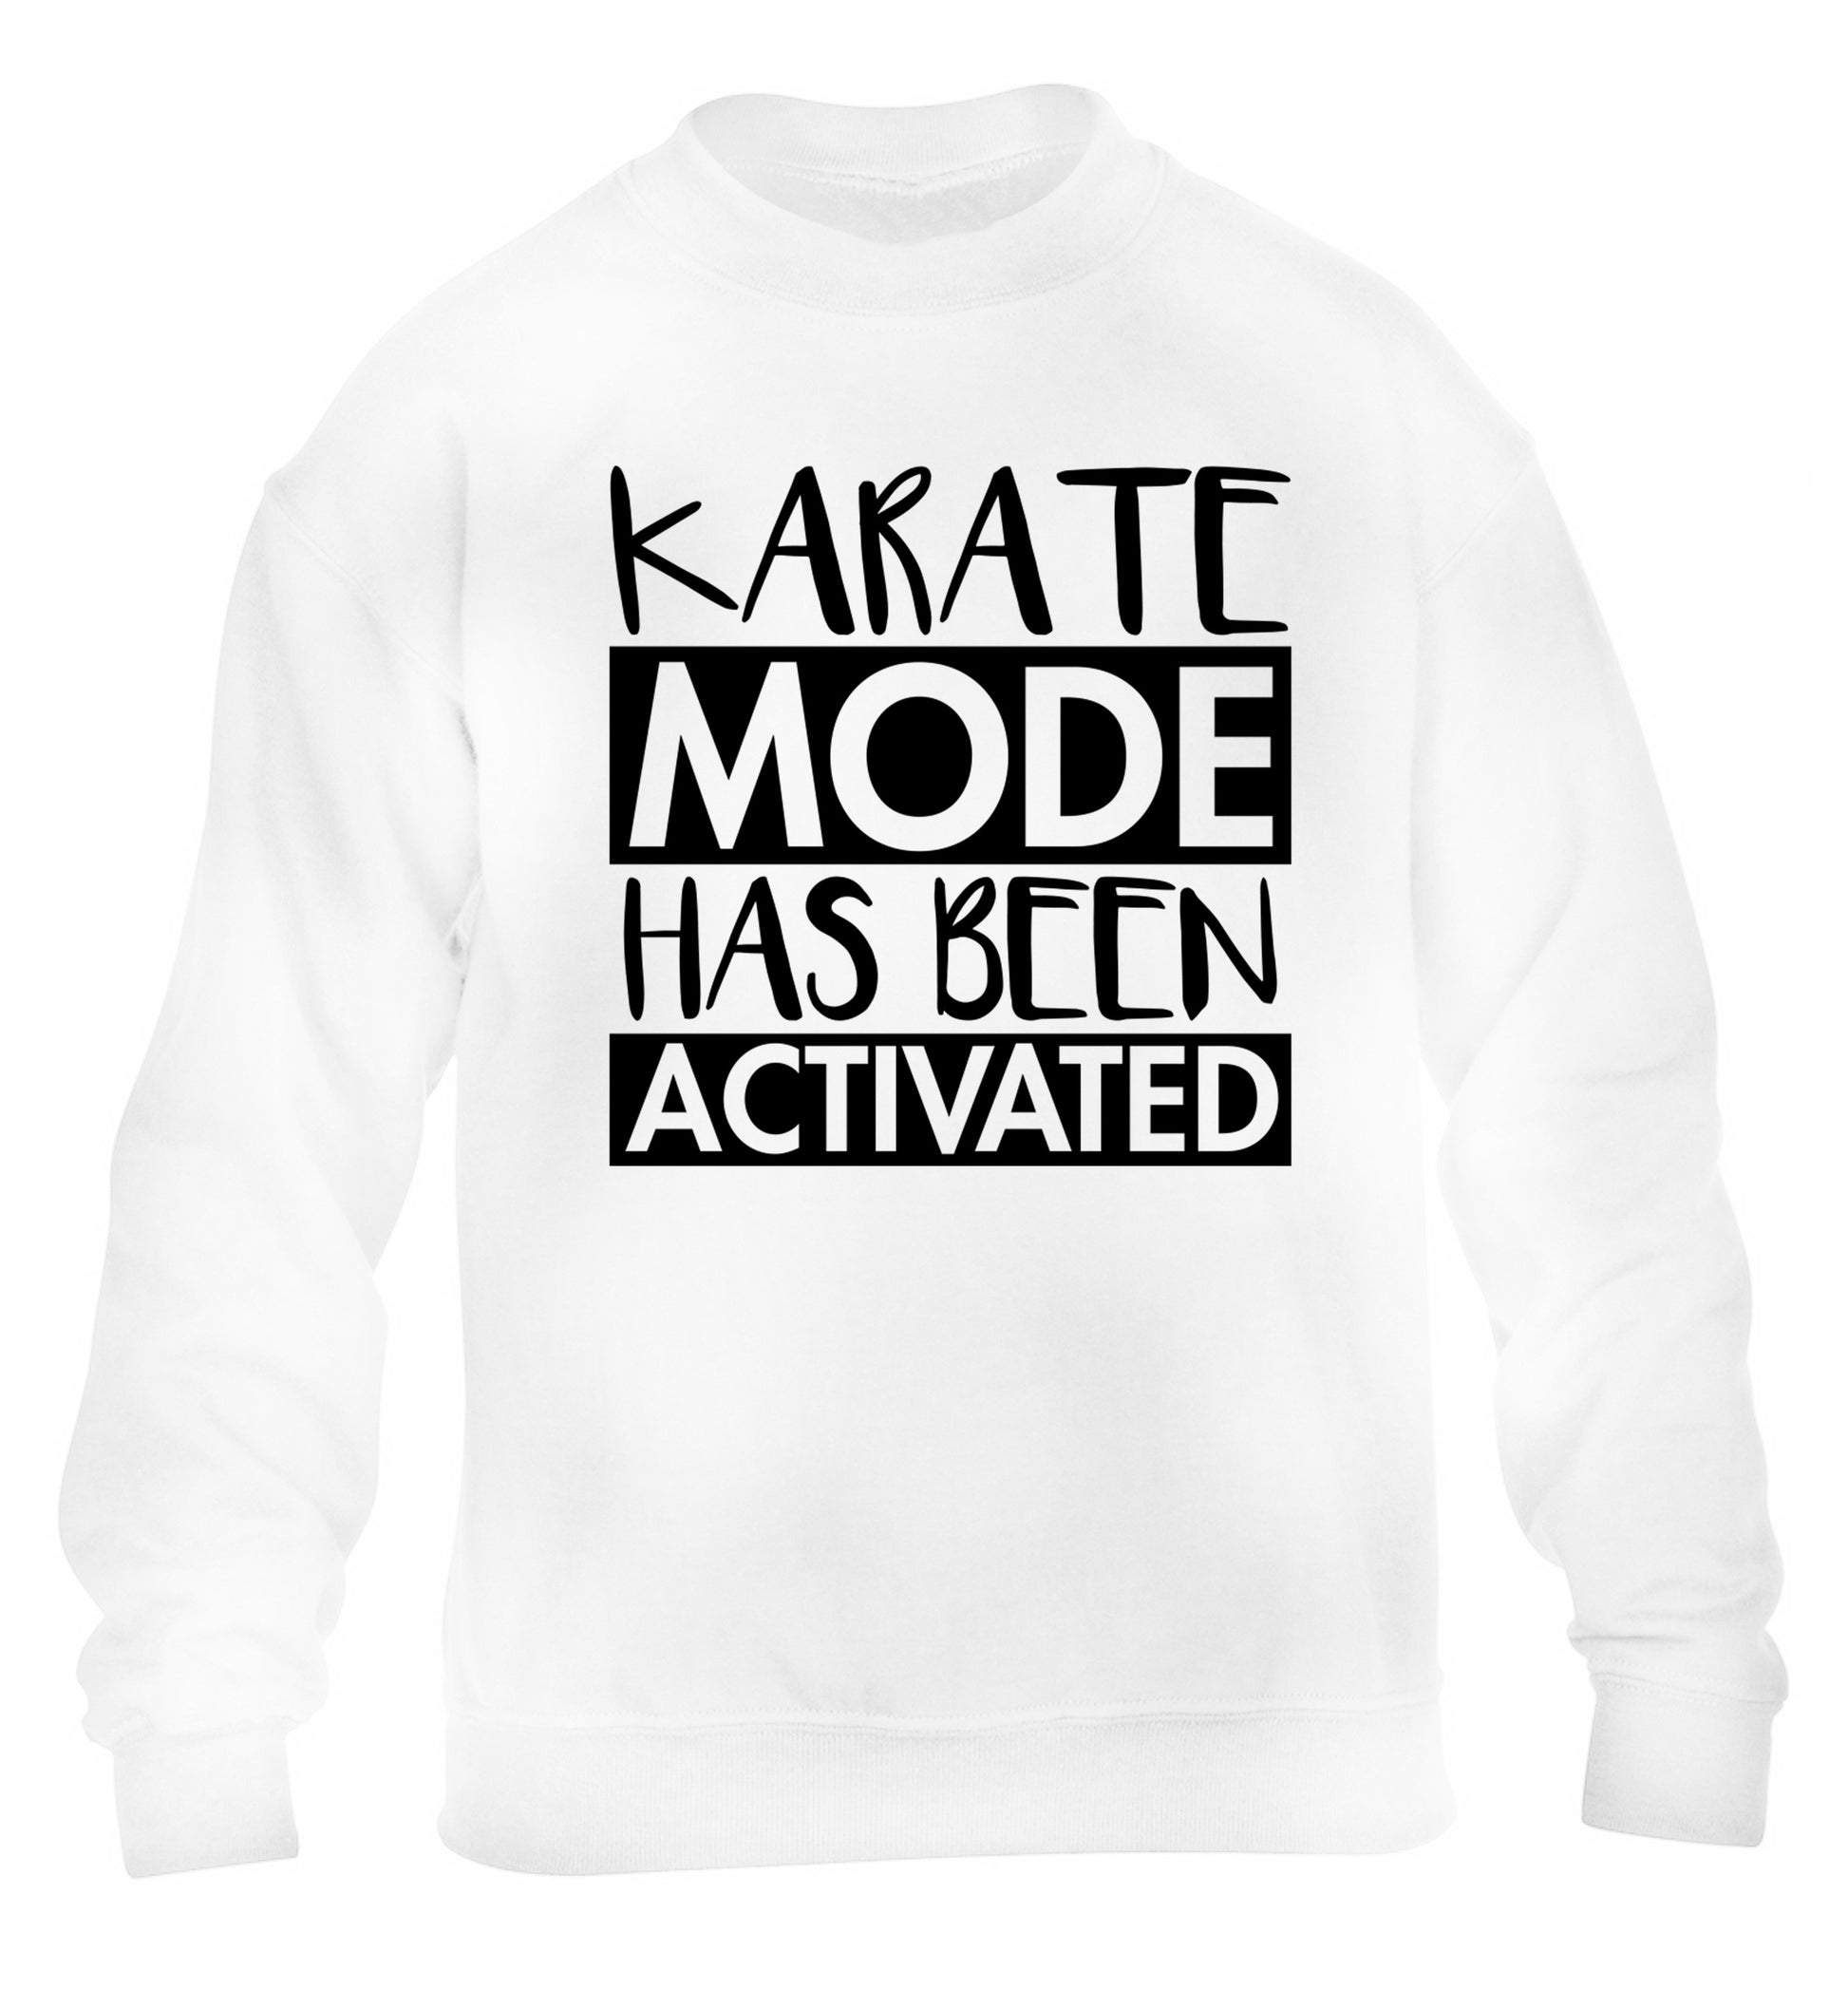 Karate mode activated children's white sweater 12-14 Years